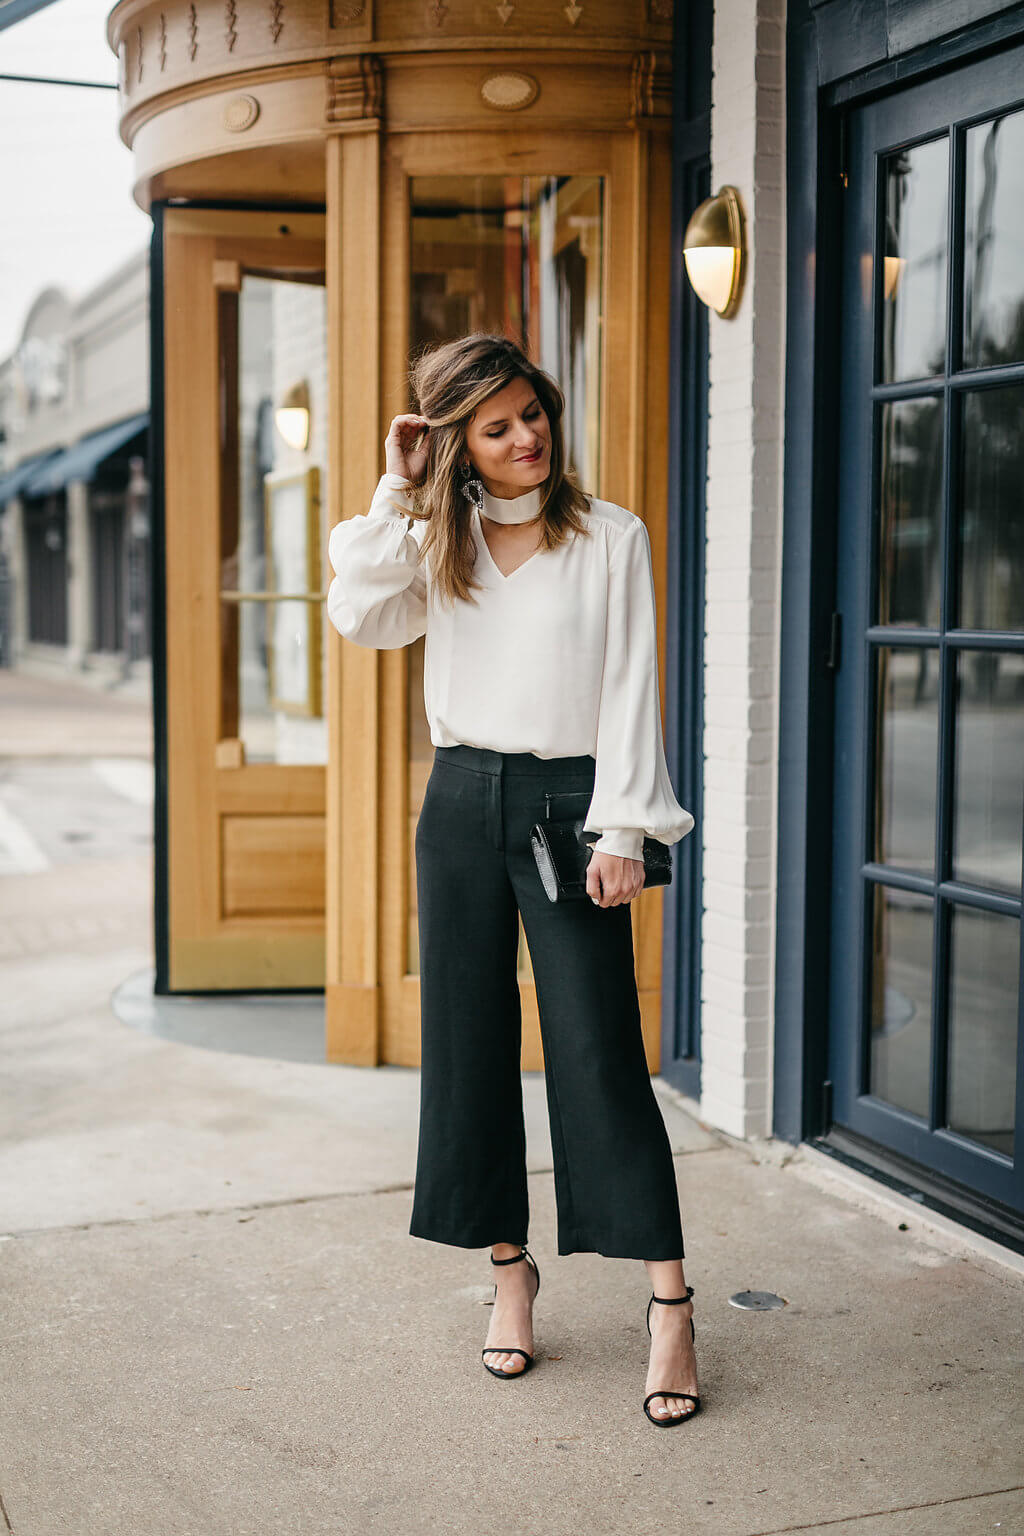 vince camuto white blouse, black cropped pants, strappy heels, office attire